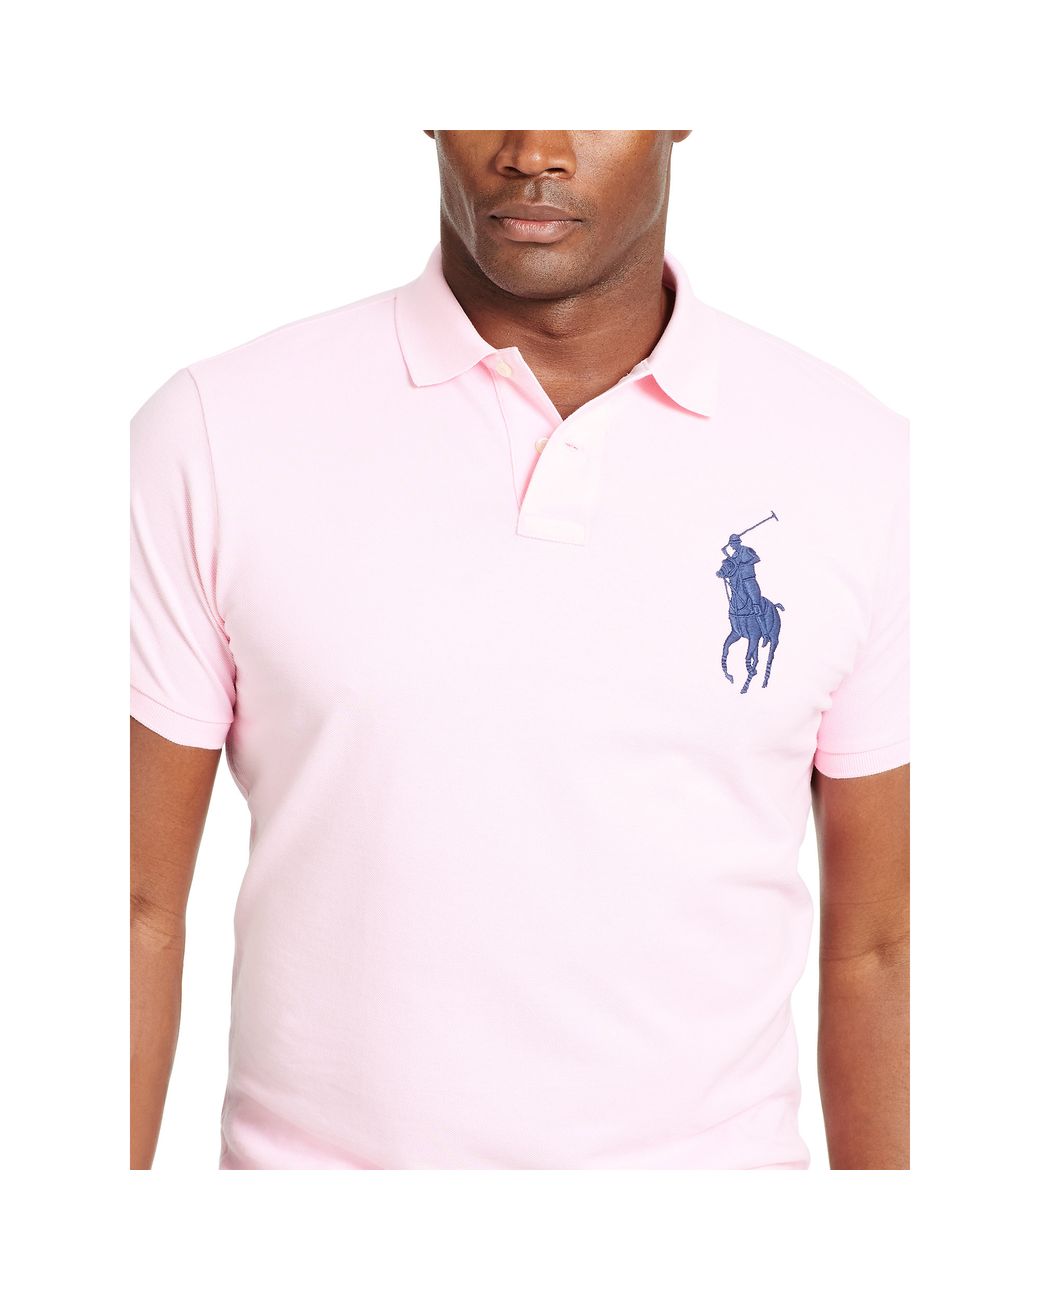 NEW Polo Ralph Lauren Womens Polo Shirt! Pink Big Pony & Number 3